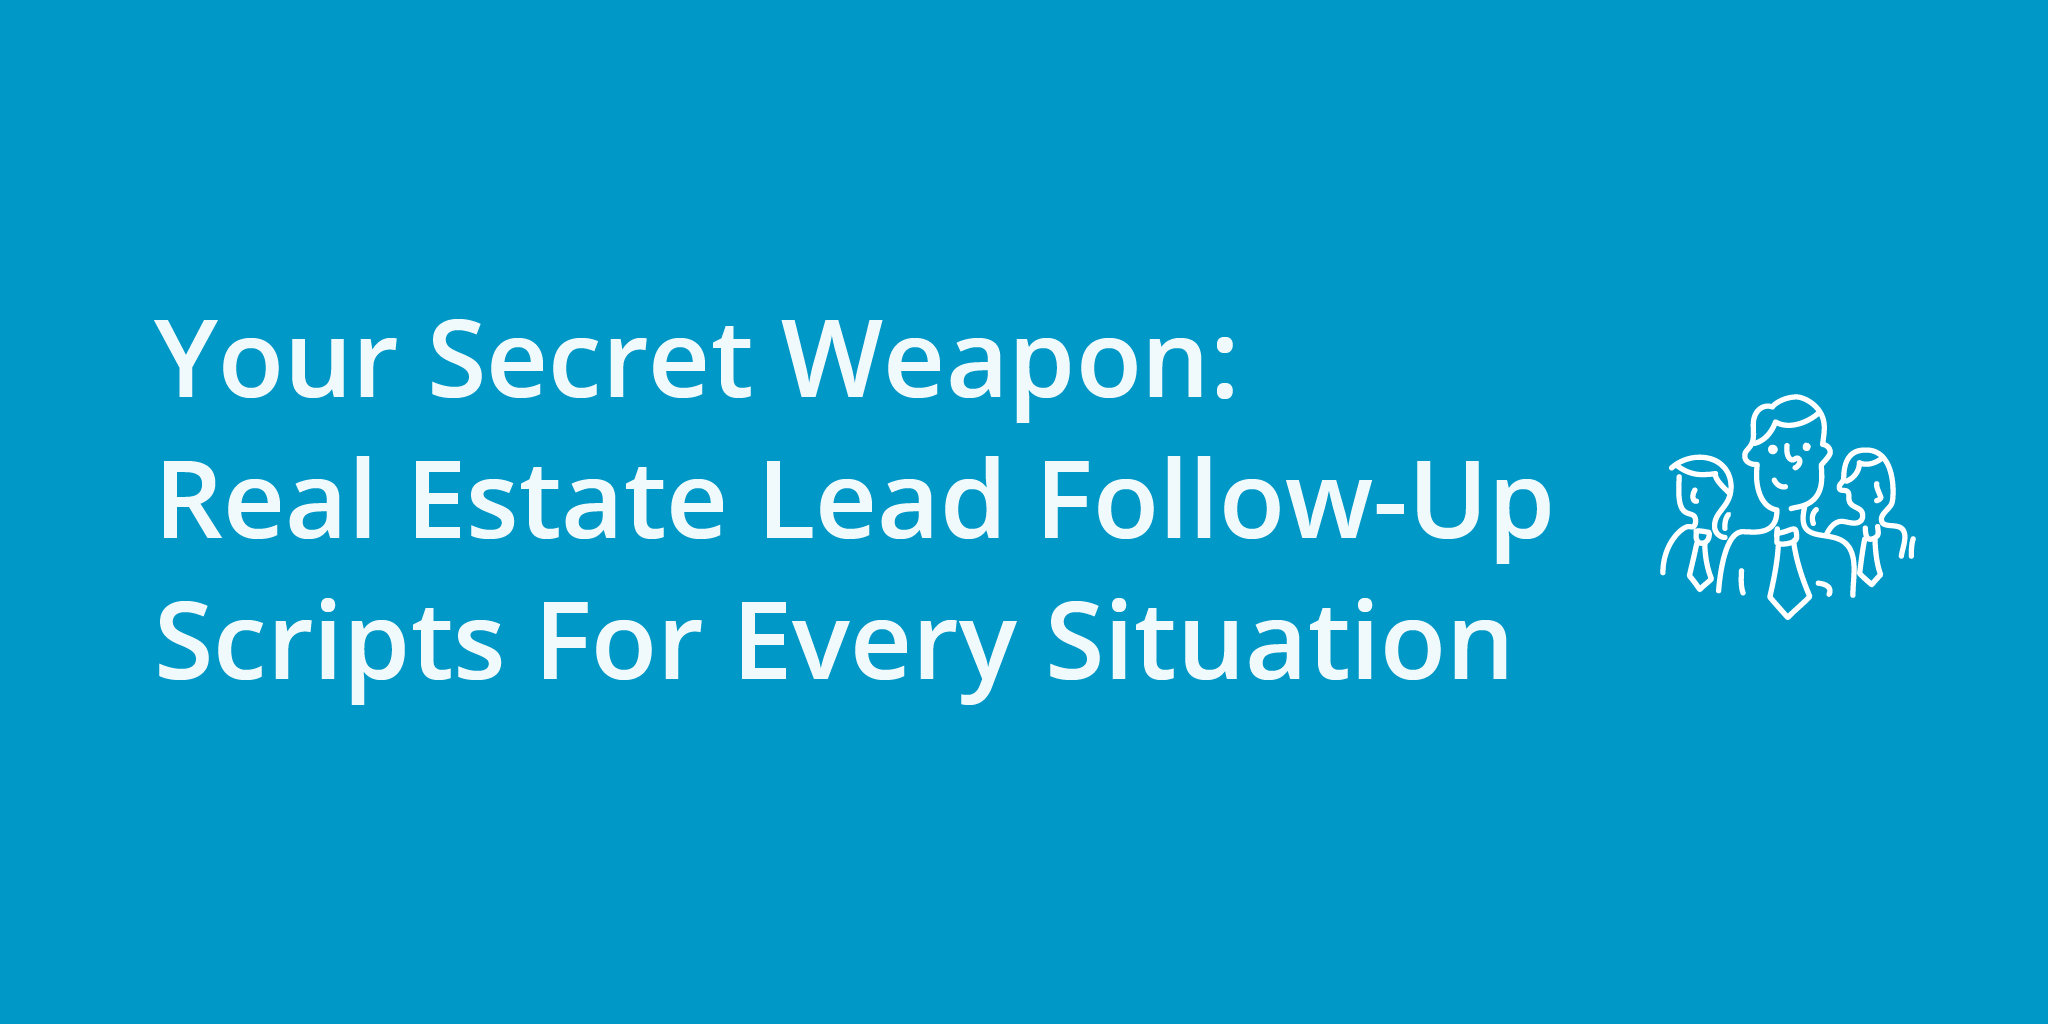 Your Secret Weapon: Real Estate Lead Follow-Up Scripts For Every Situation | Telephones for business